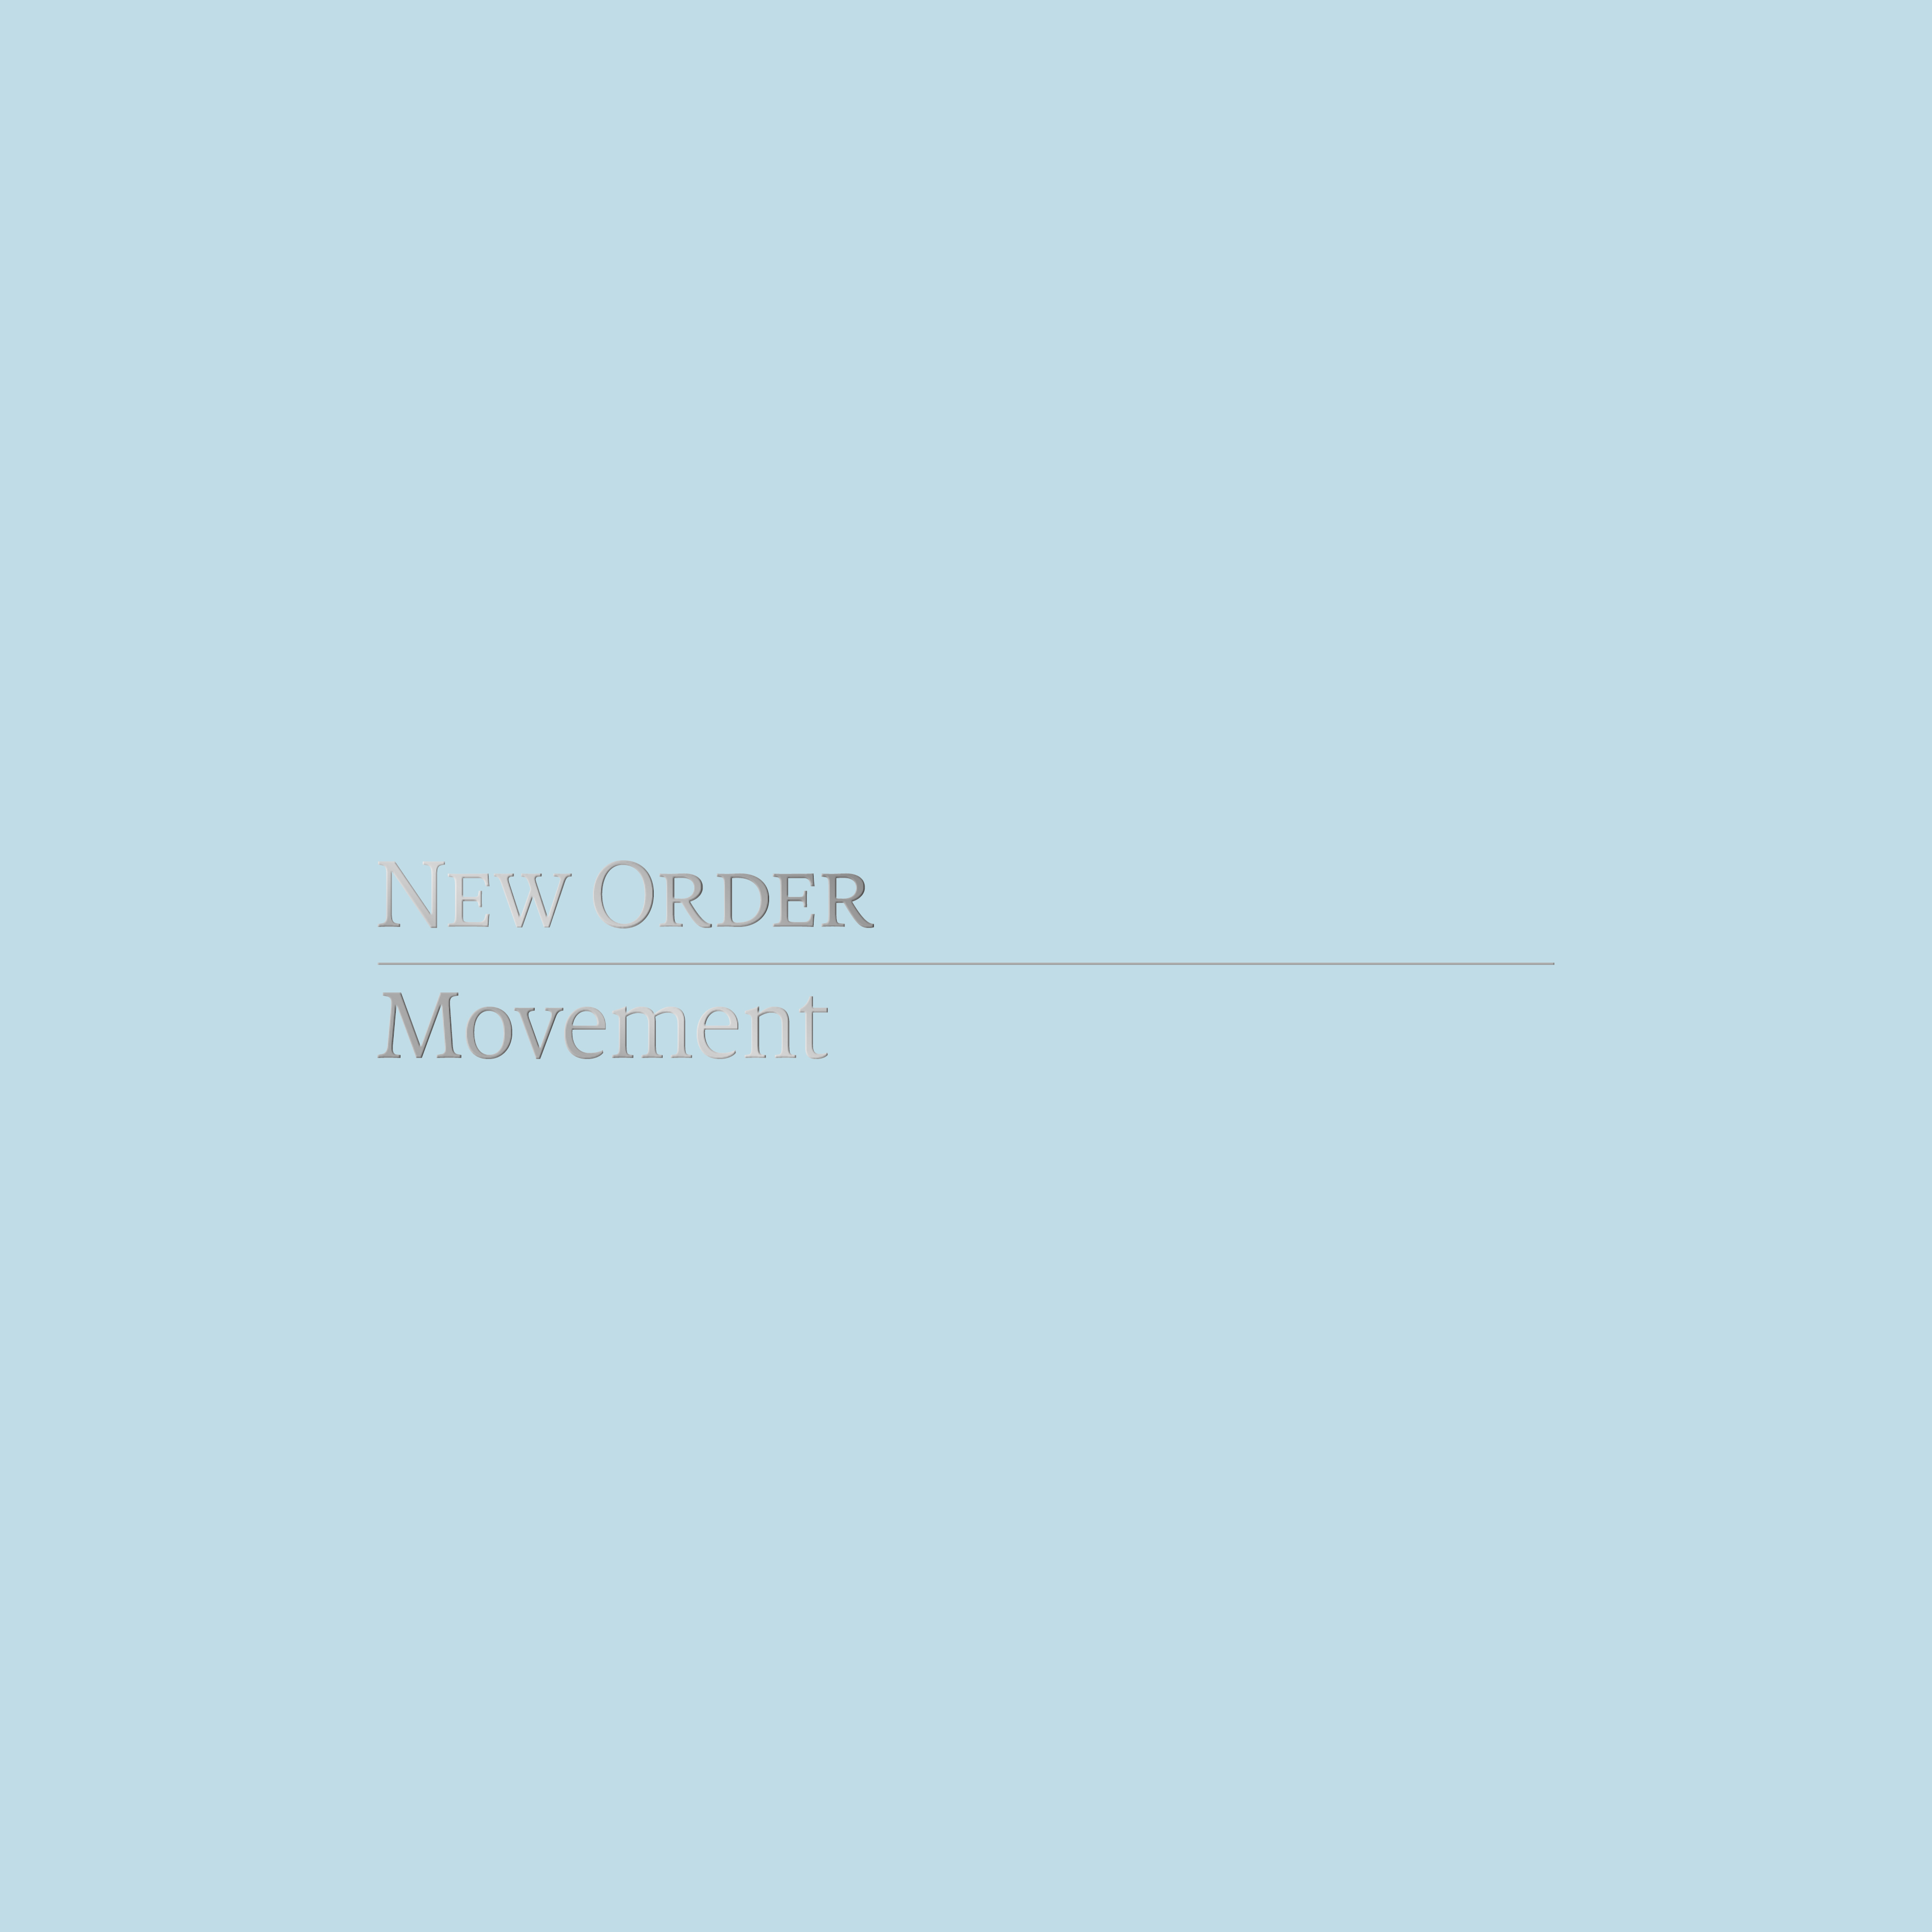 Have you new order. New order Movement. New order обложки альбомов. New order 1981. New order Movement Cover.